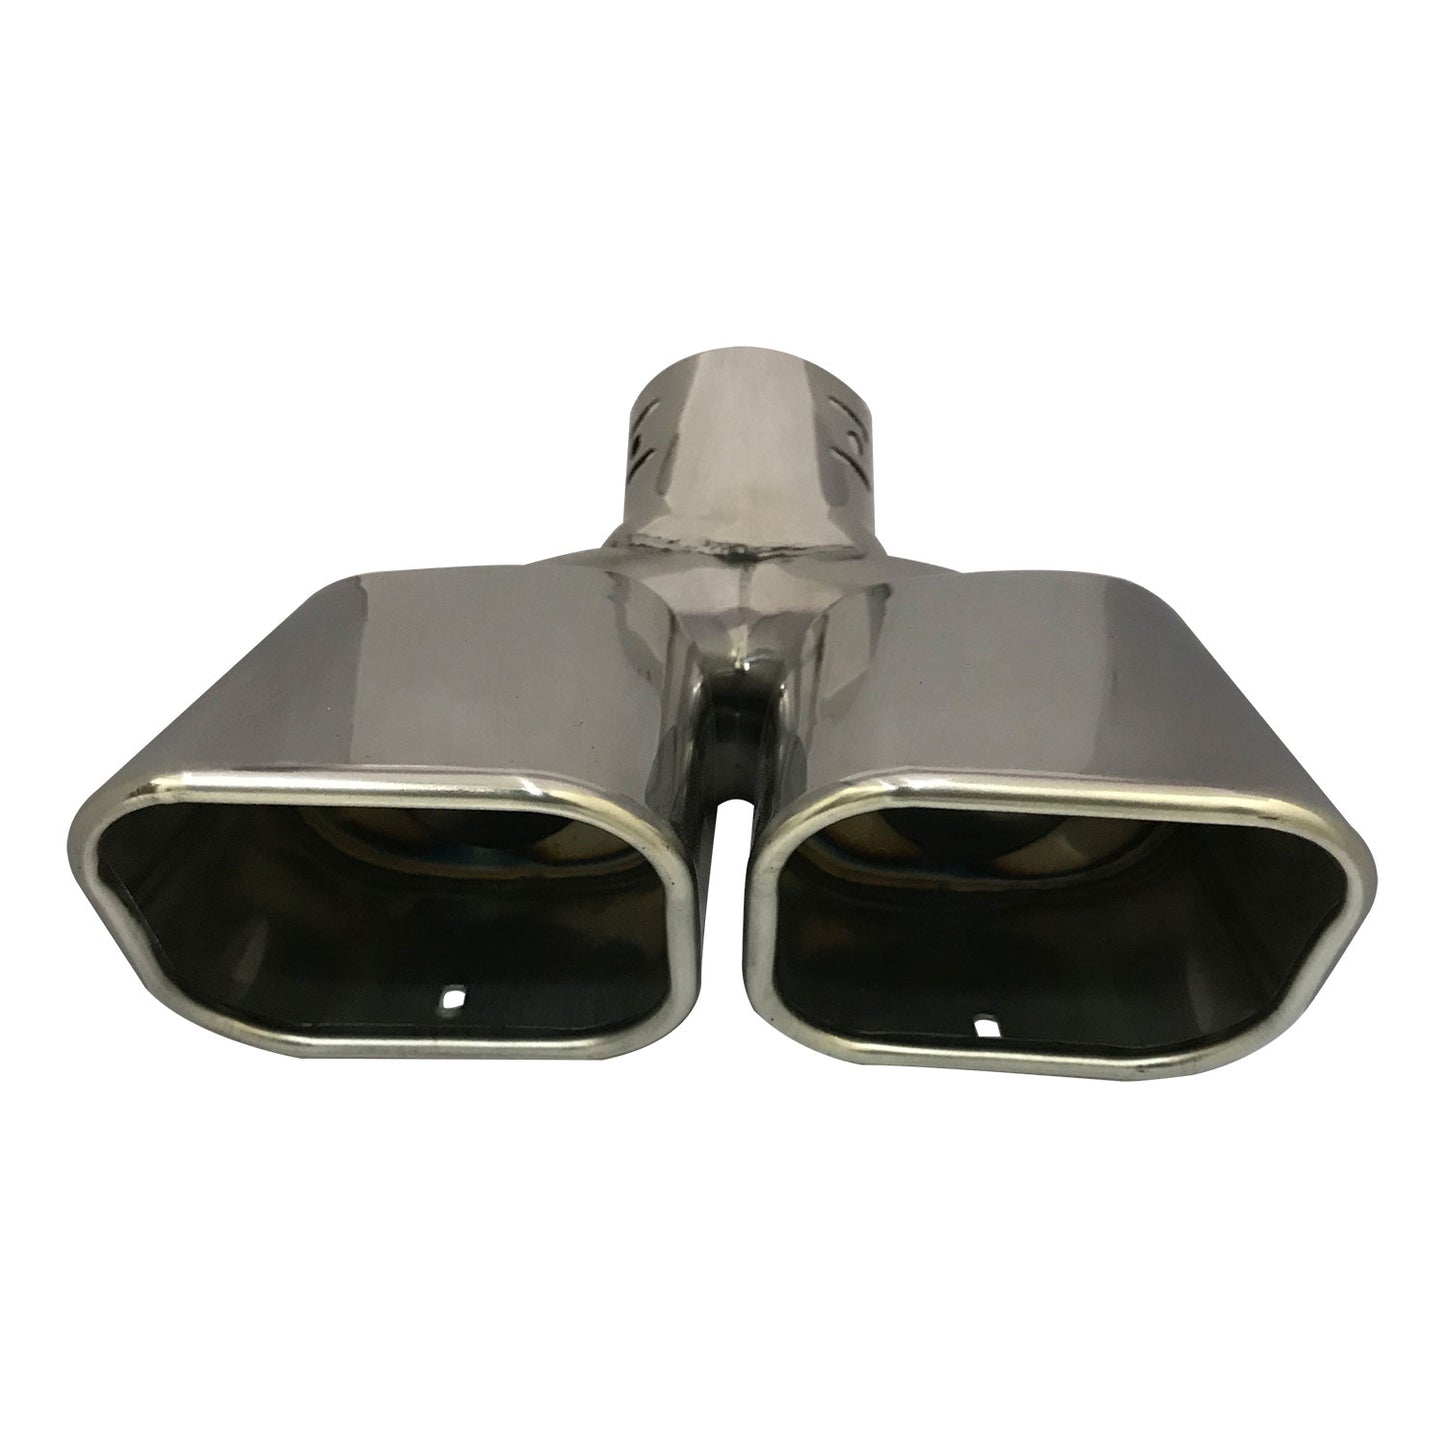 Oshotto Stainless Steel SS-016 Dual Pipe Car Exhaust Muffler Silencer Cover Universal for All Cars (Chrome)